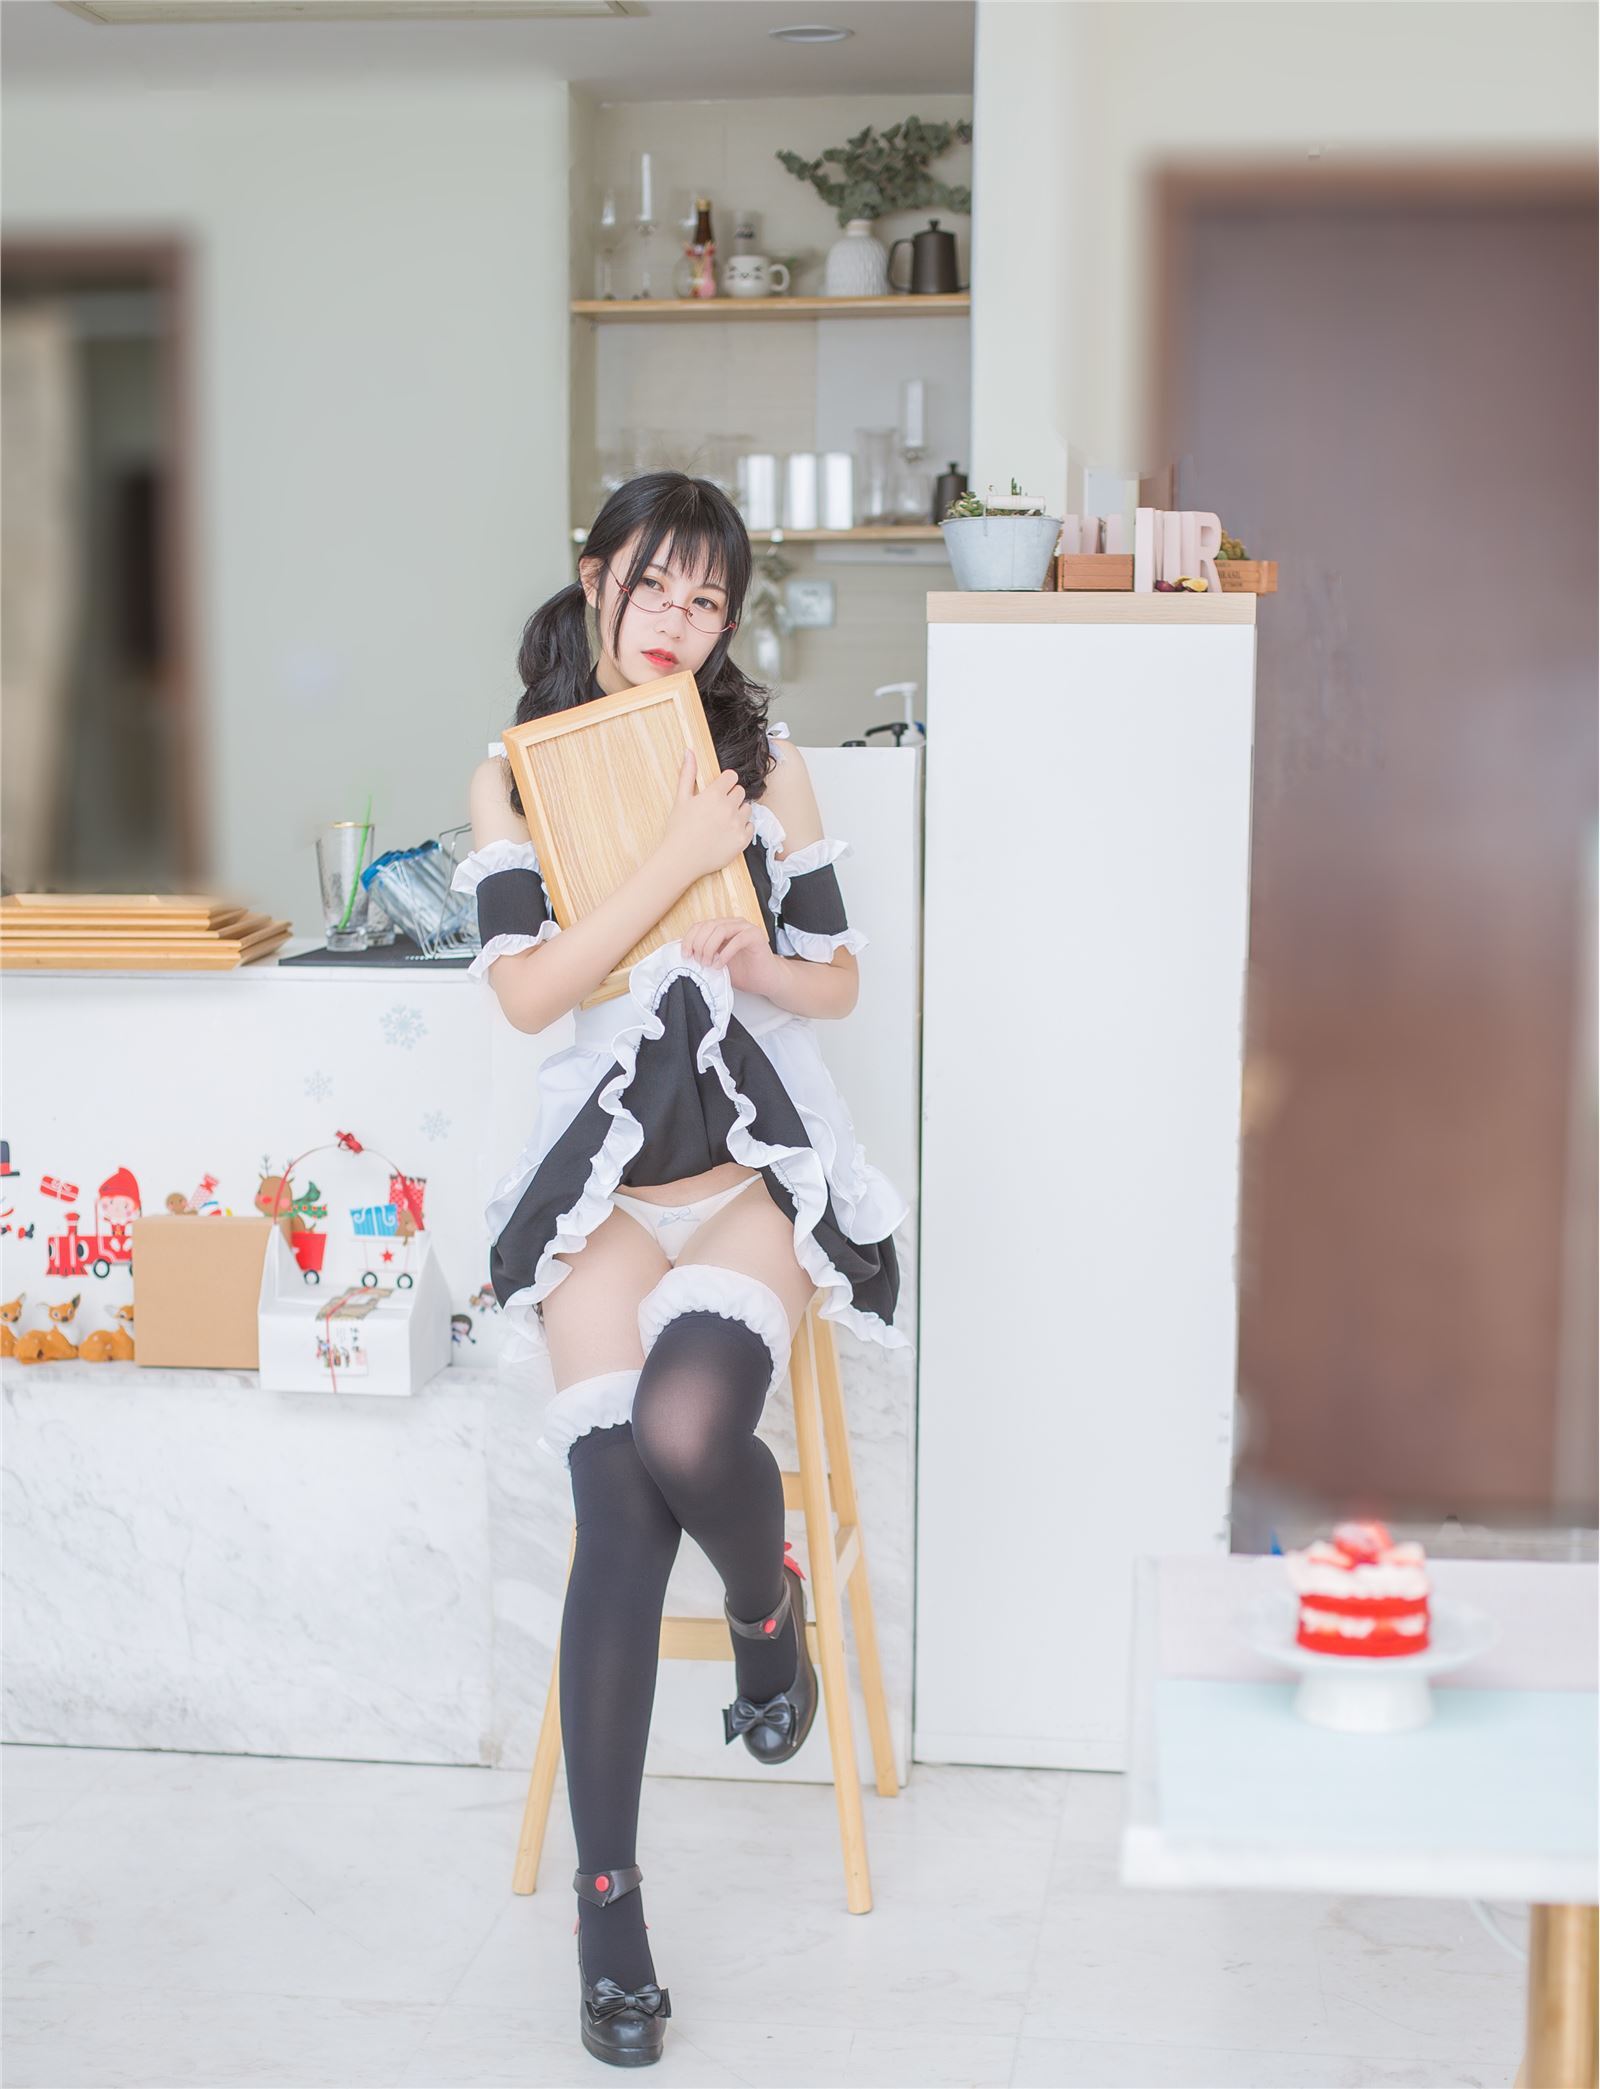 Monthly Su July latest photo final version maid